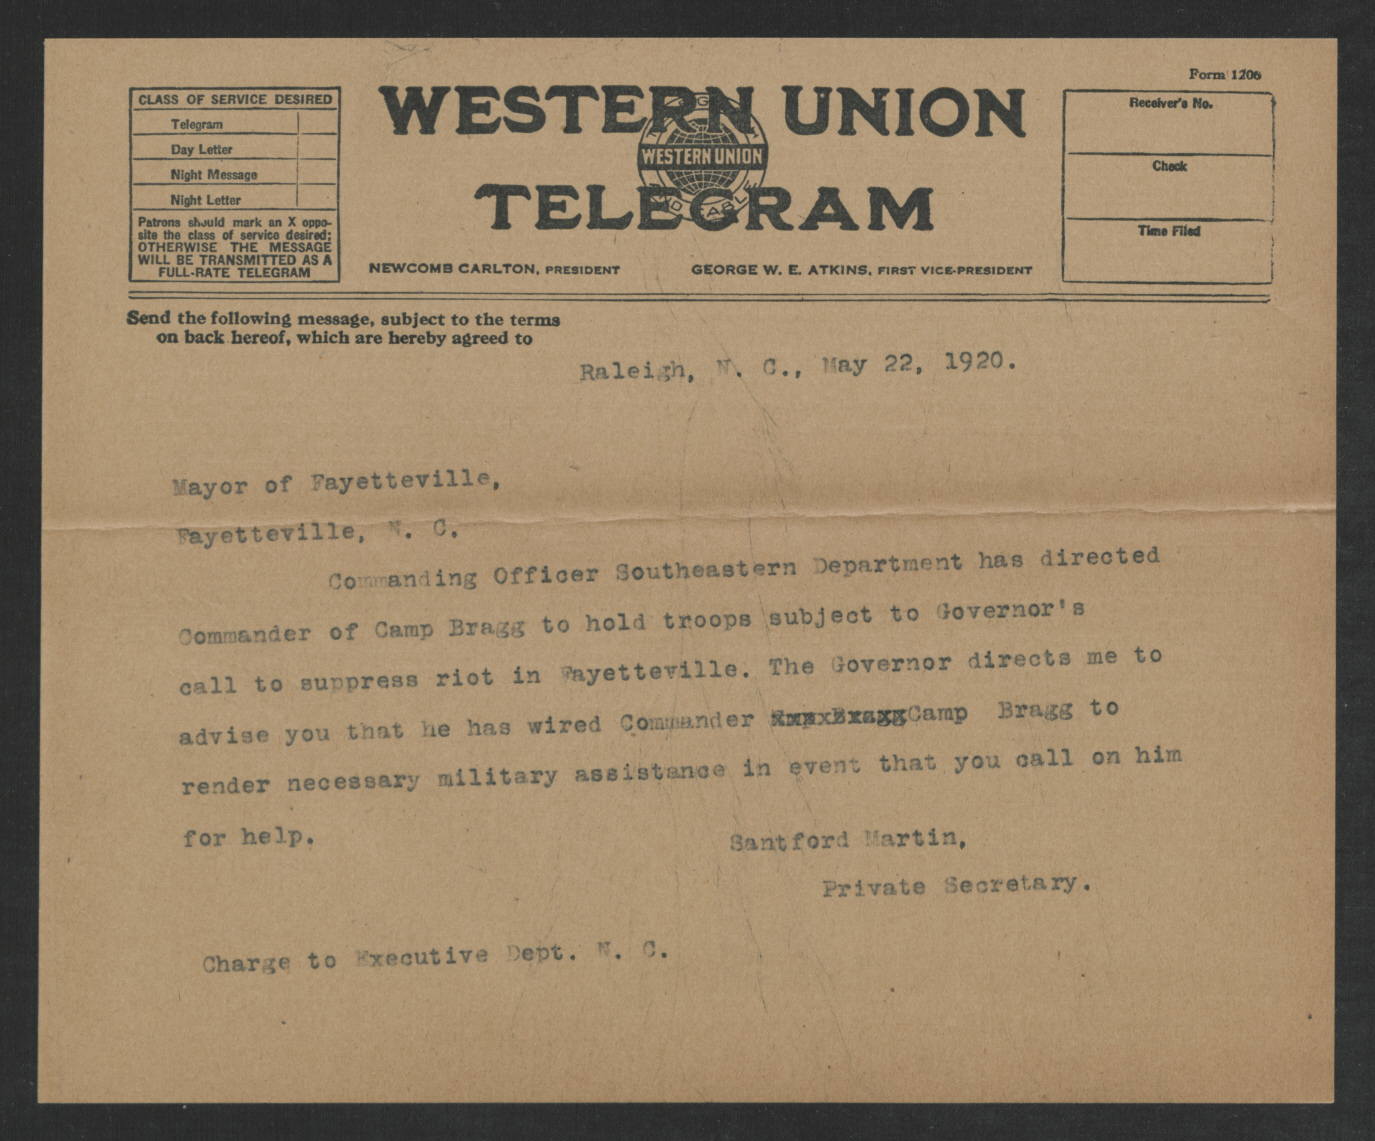 Telegram from Santford Martin to the Mayor of Fayetteville, May 22, 1920